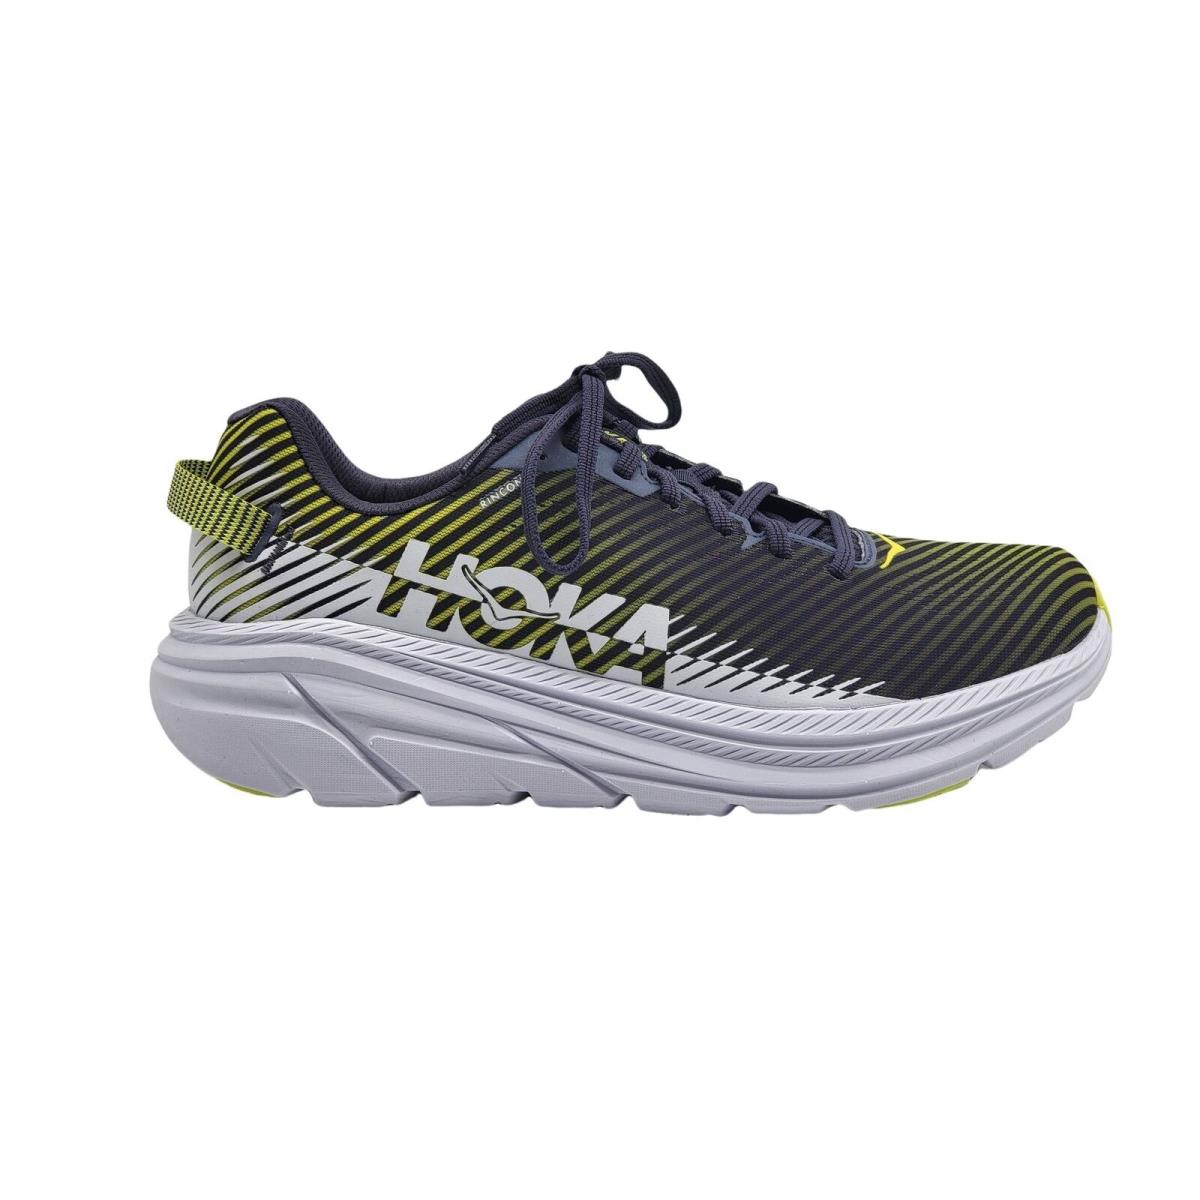 Hoka One One Rincon 2 Mens Road Running Shoes Sneakers Grey White US Size 10.5